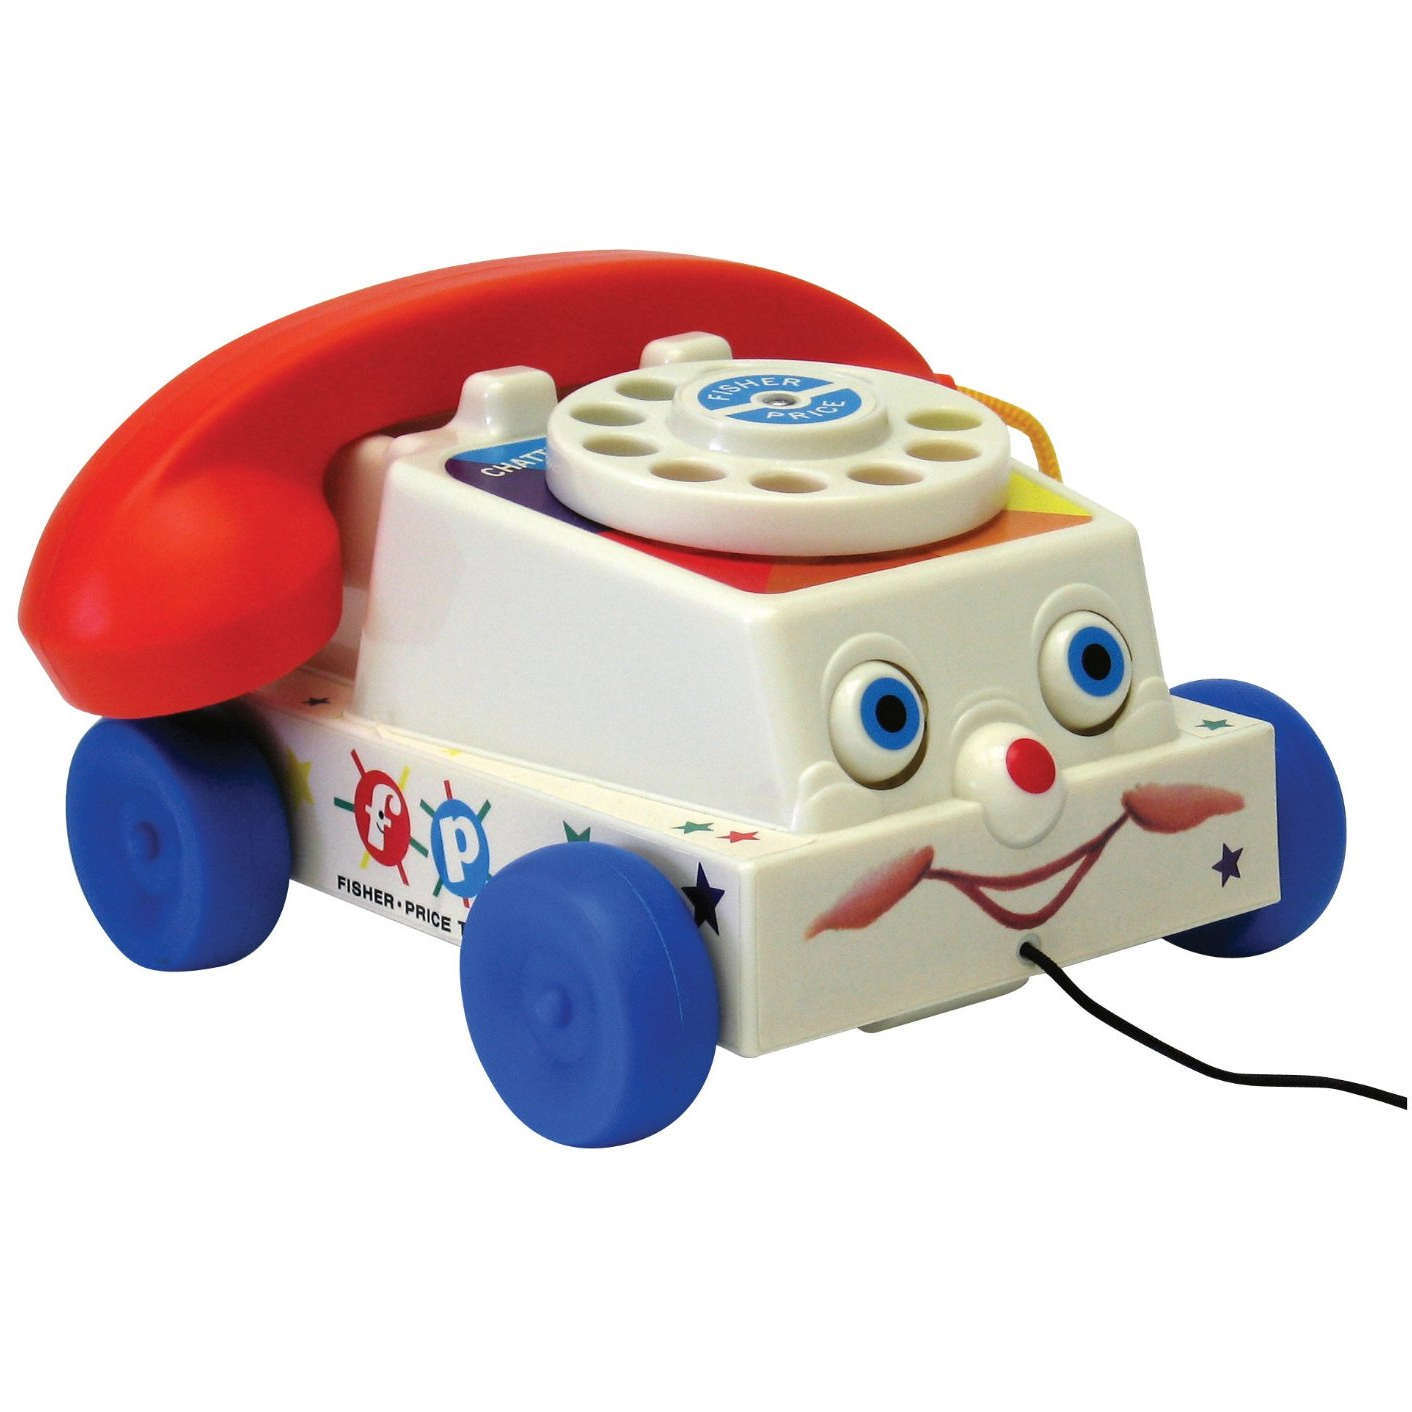 Fisher Price Classic Chatter Phone Only $7.35! (Reg $19.99)